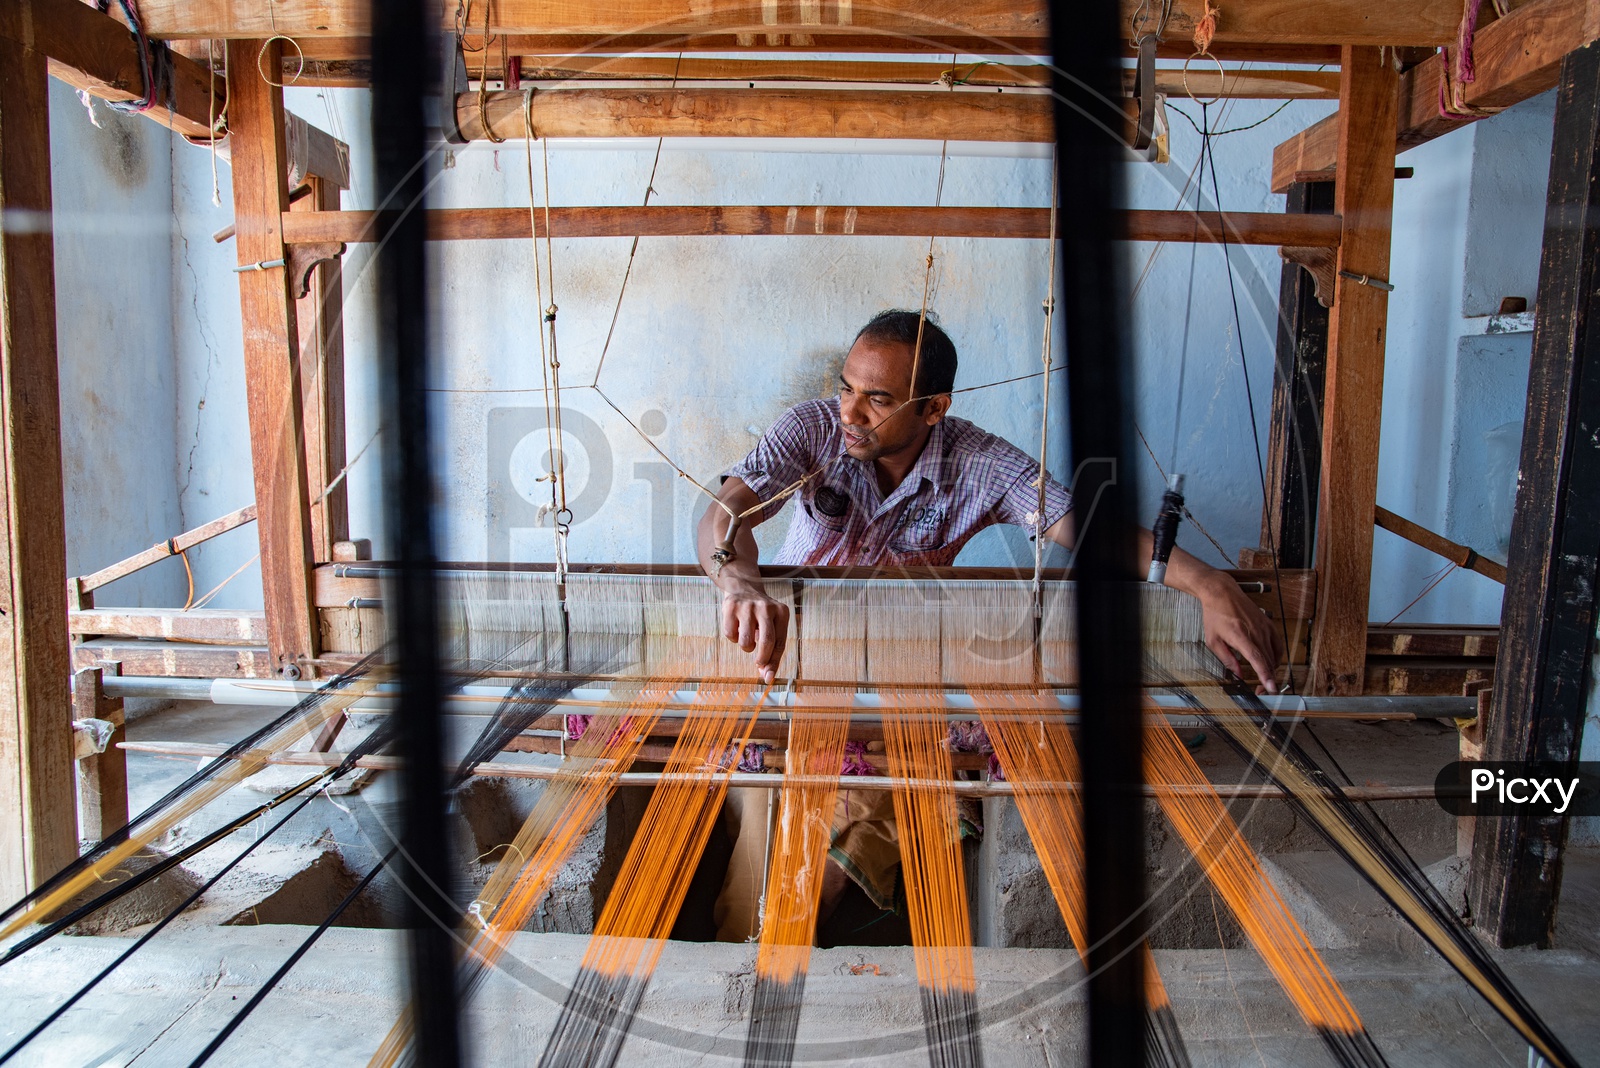 Working weaving the threads to make Ikkat saree on a weaving spindle